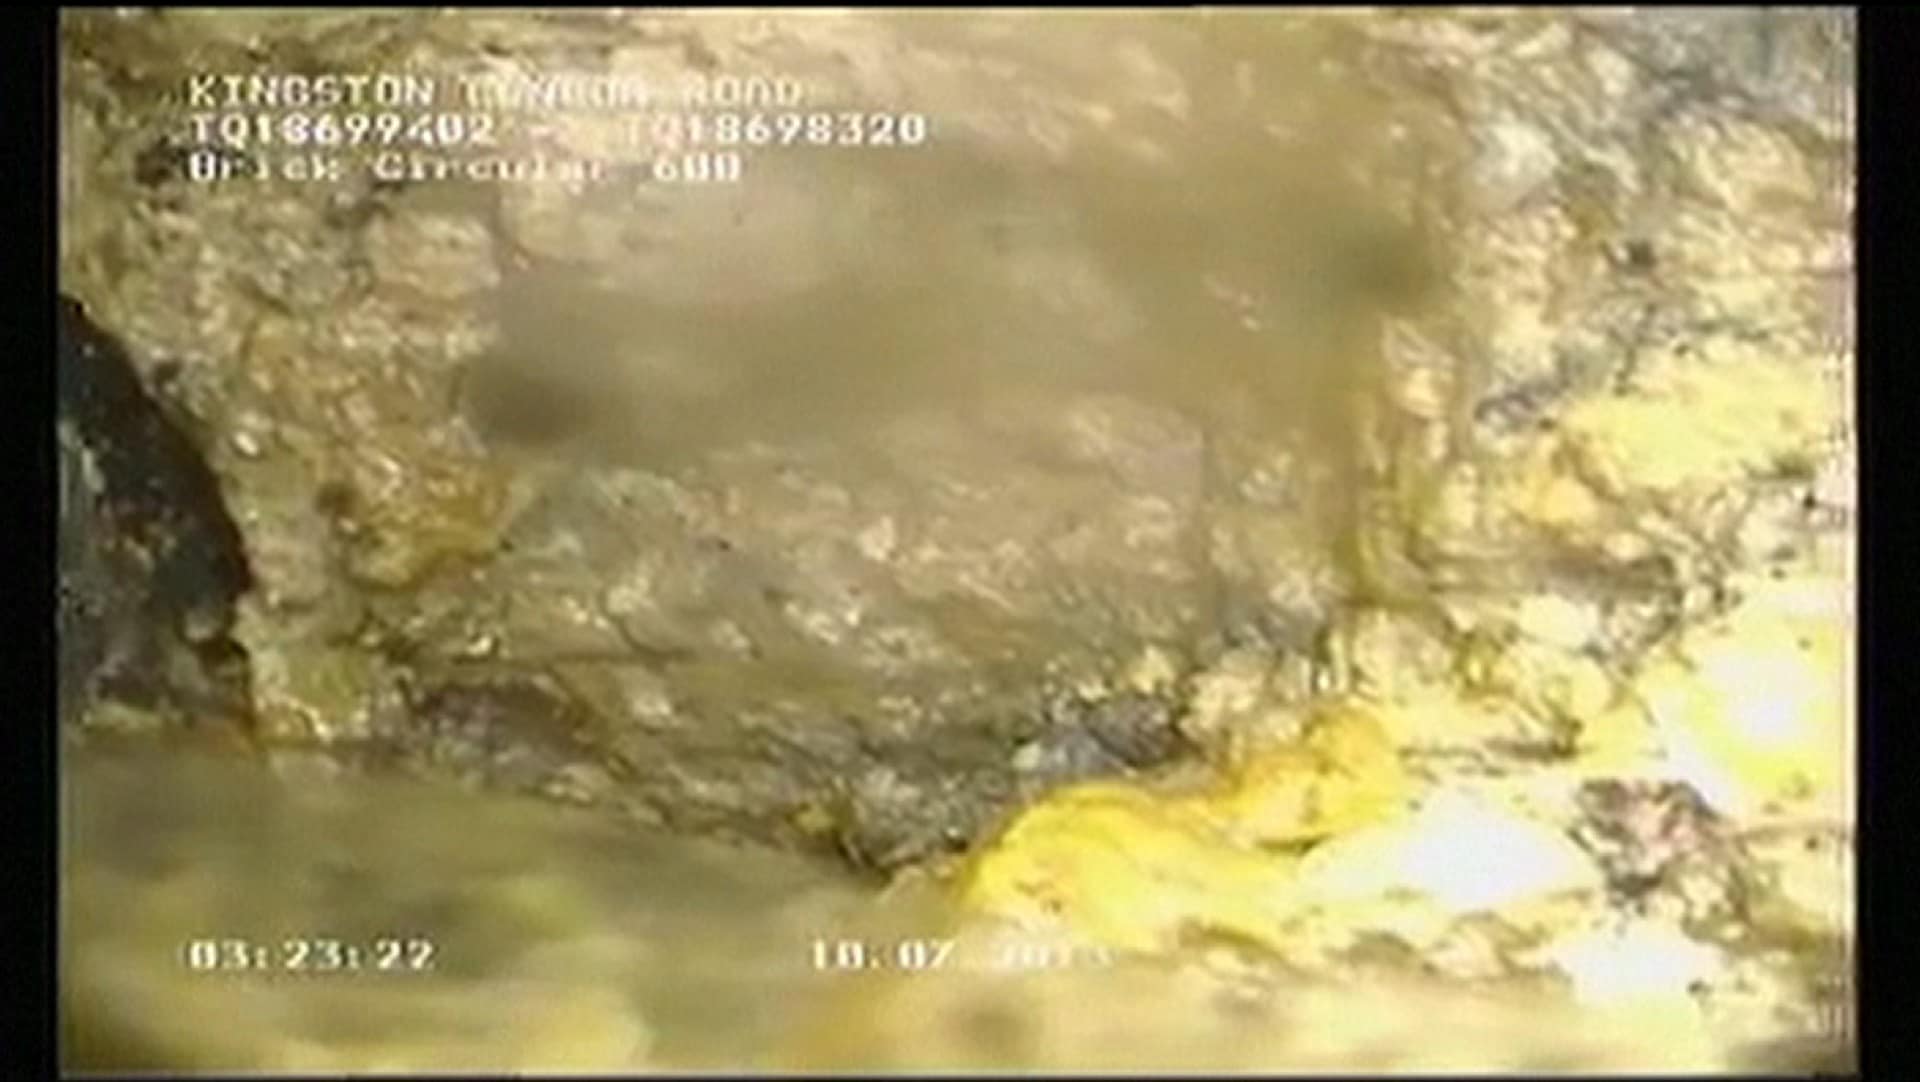 Found a 15-ton chunk of fat in the drain – NRK Urix – Foreign news and documentaries